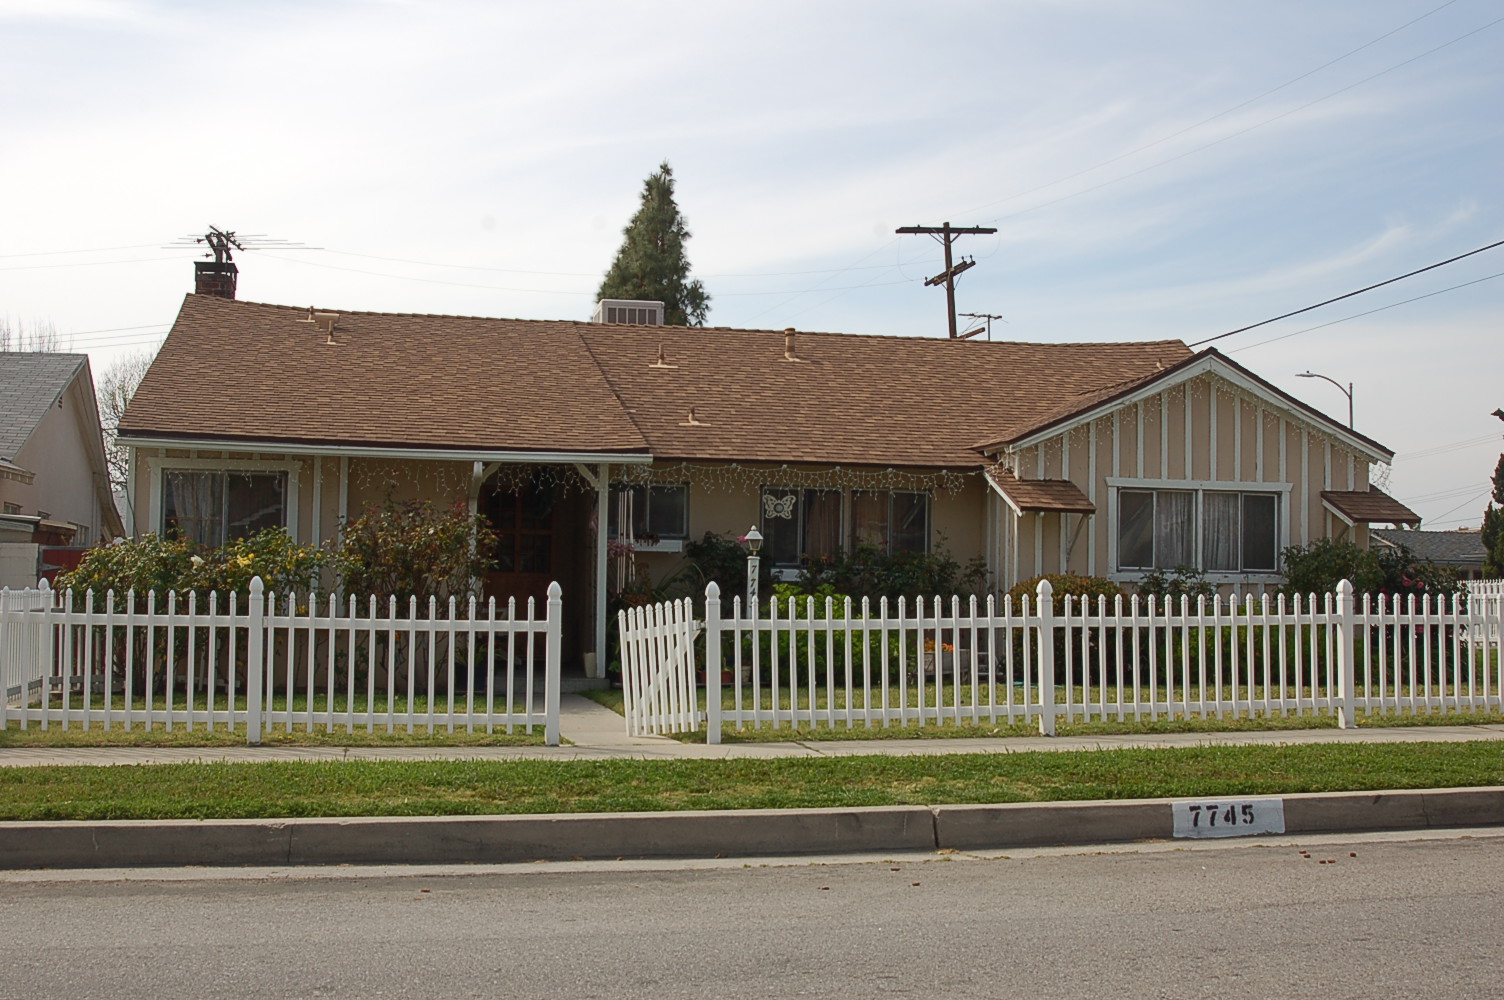  7745  BELLAIRE AVE, NORTH HOLLYWOOD (AREA, CA photo